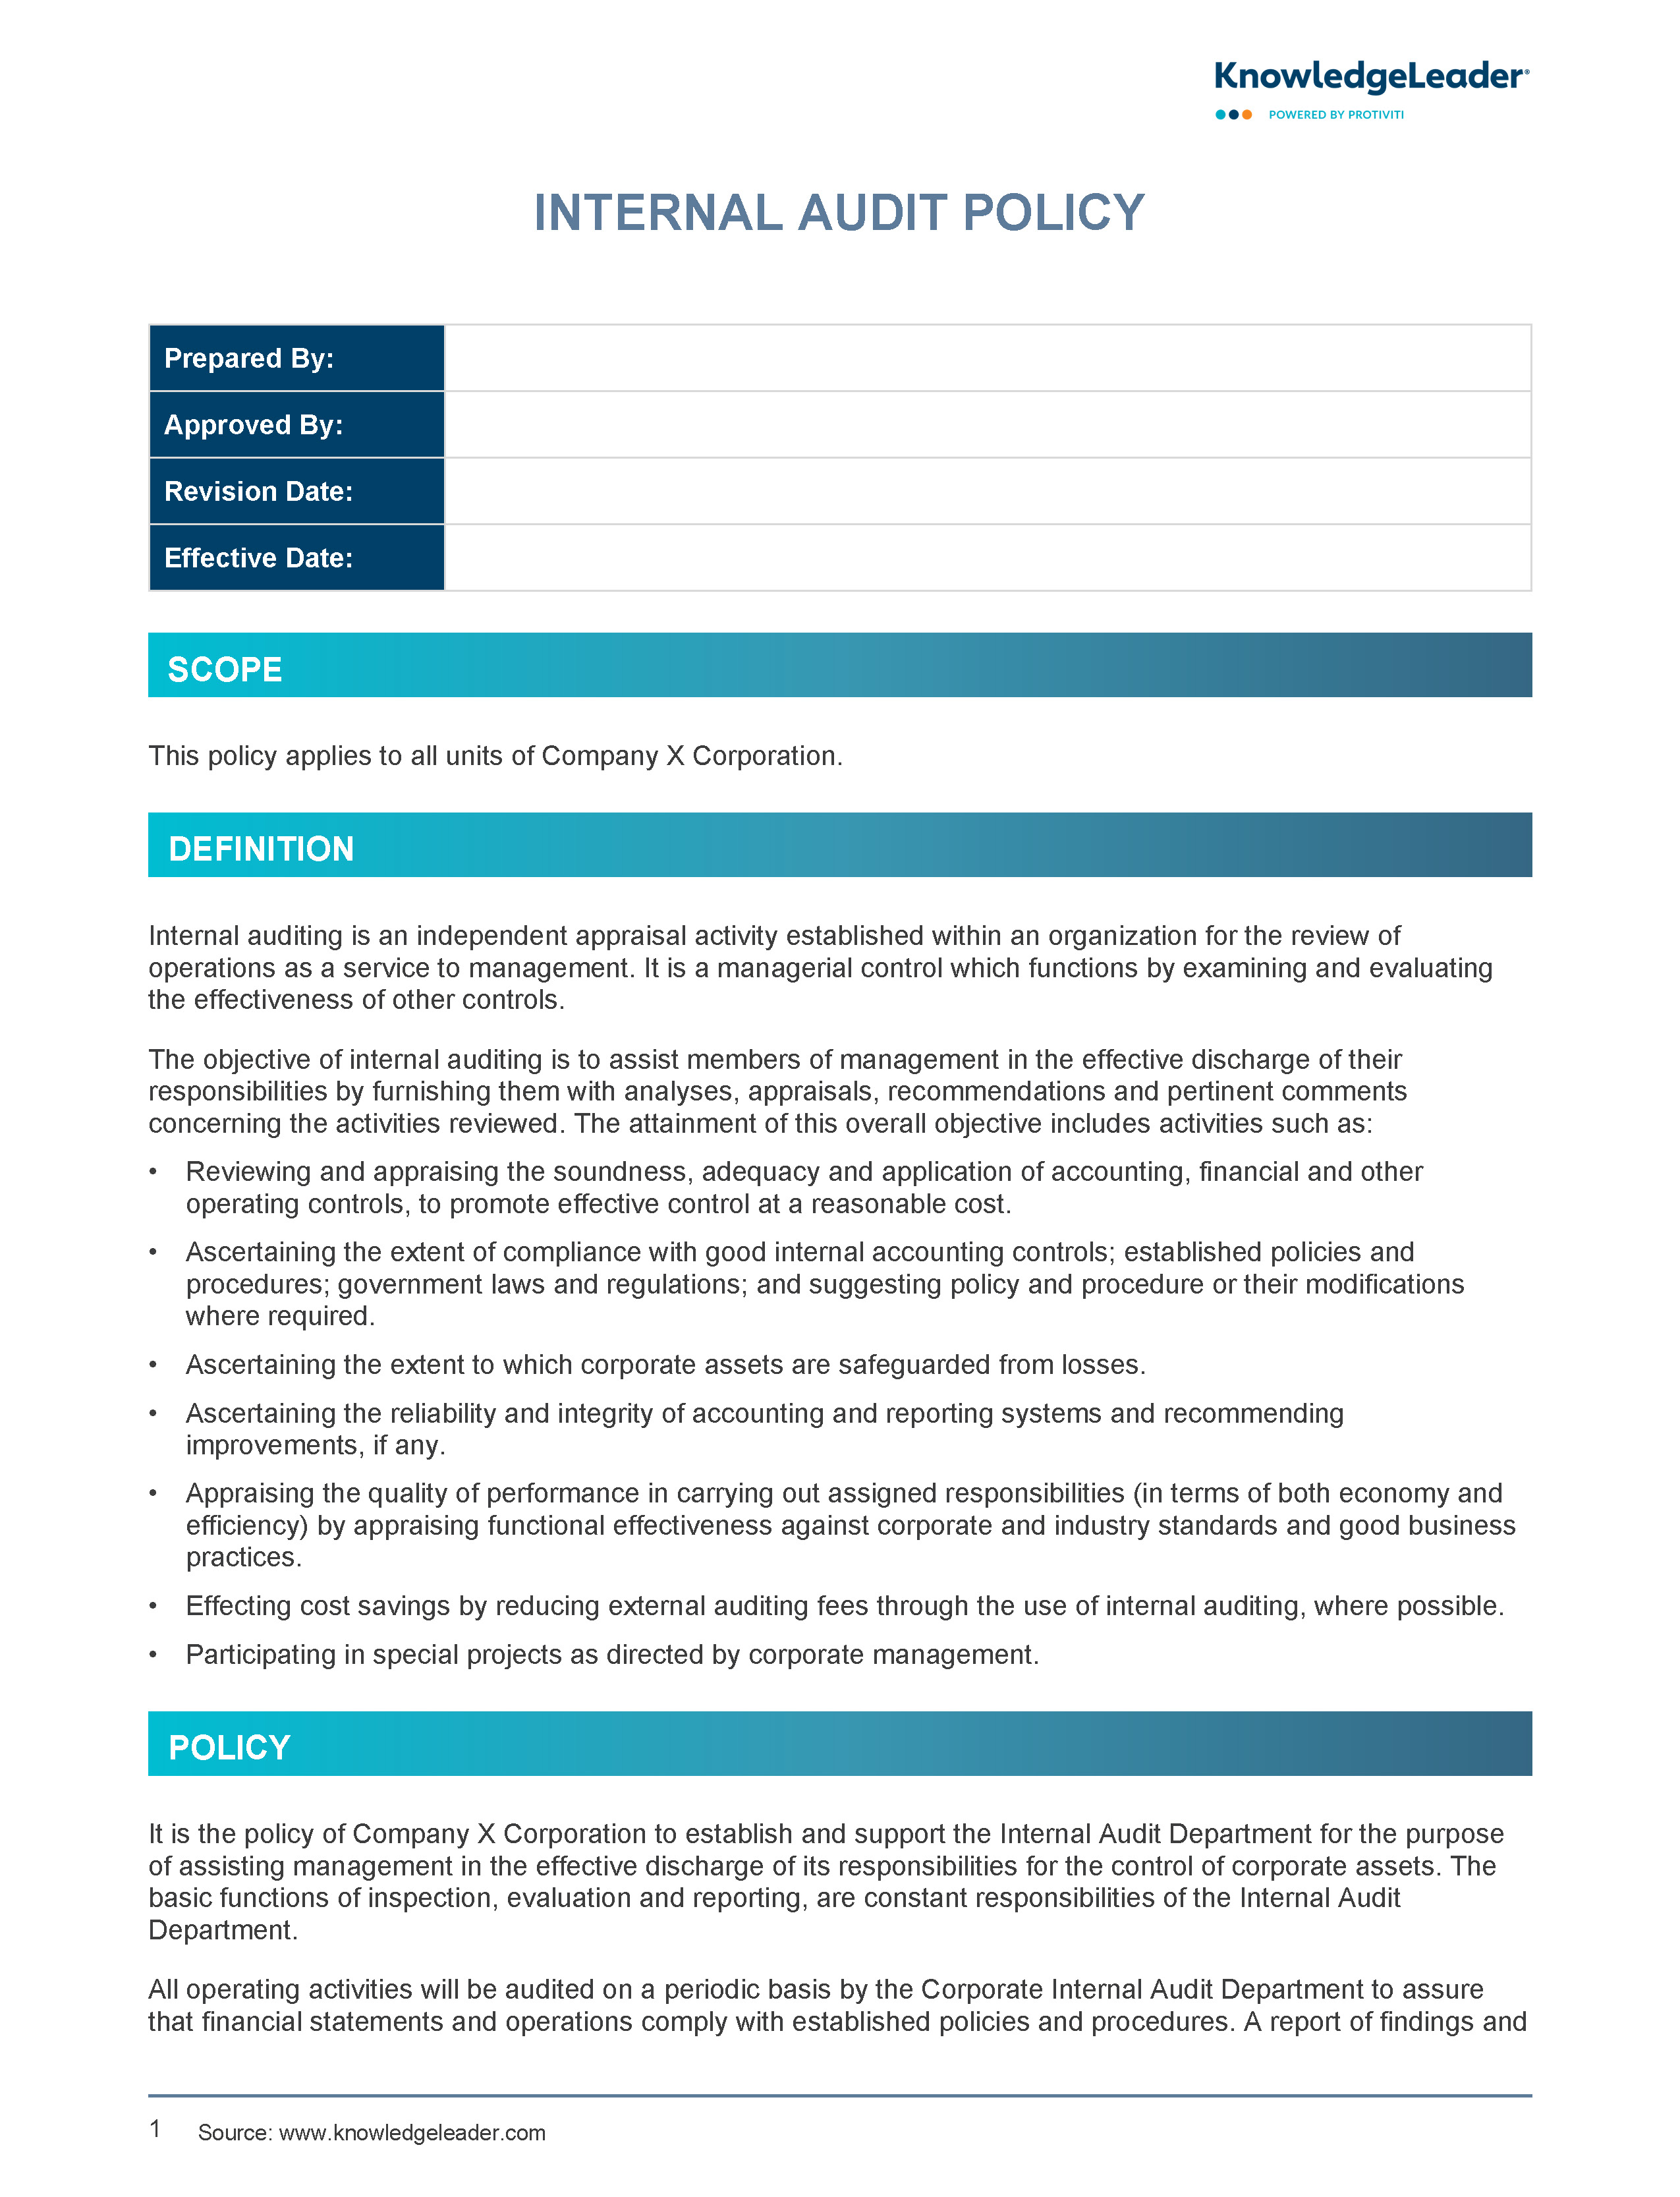 Screenshot of the first page of Internal Audit Policy